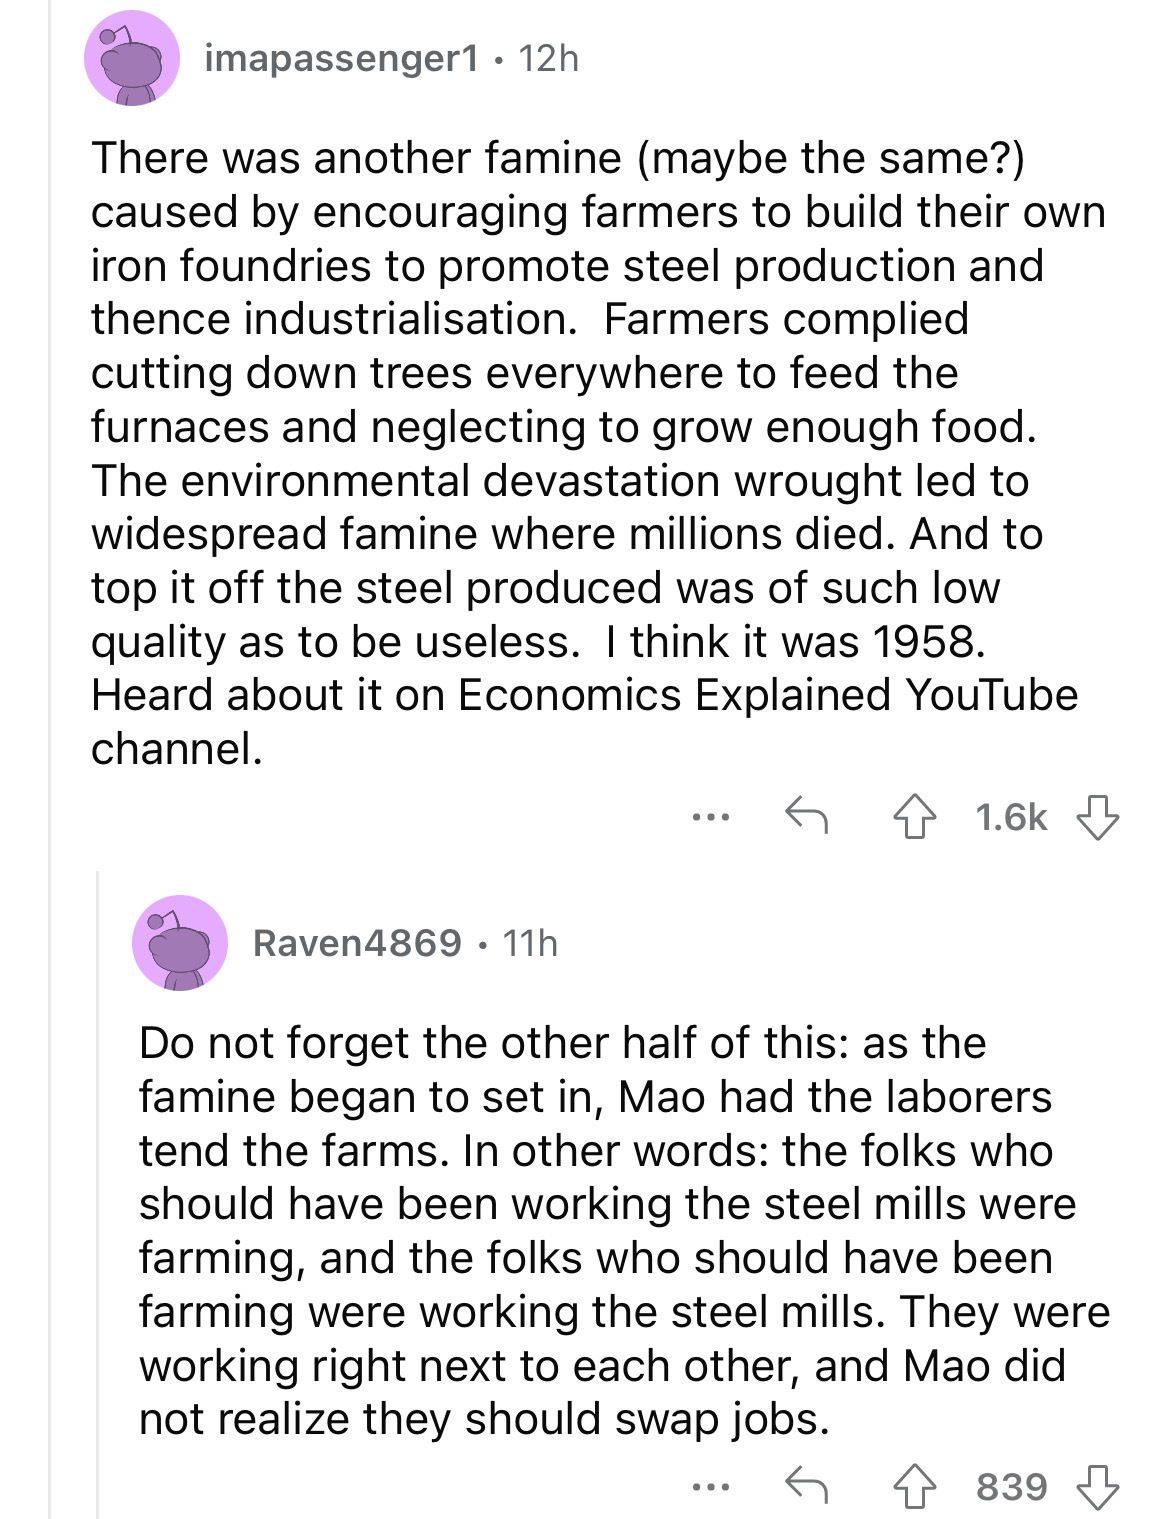 imapassenger1 12h There was another famine maybe the same? caused by encouraging farmers to build their own iron foundries to promote steel production and thence industrialisation. Farmers complied cutting down trees everywhere to feed the furnaces and…